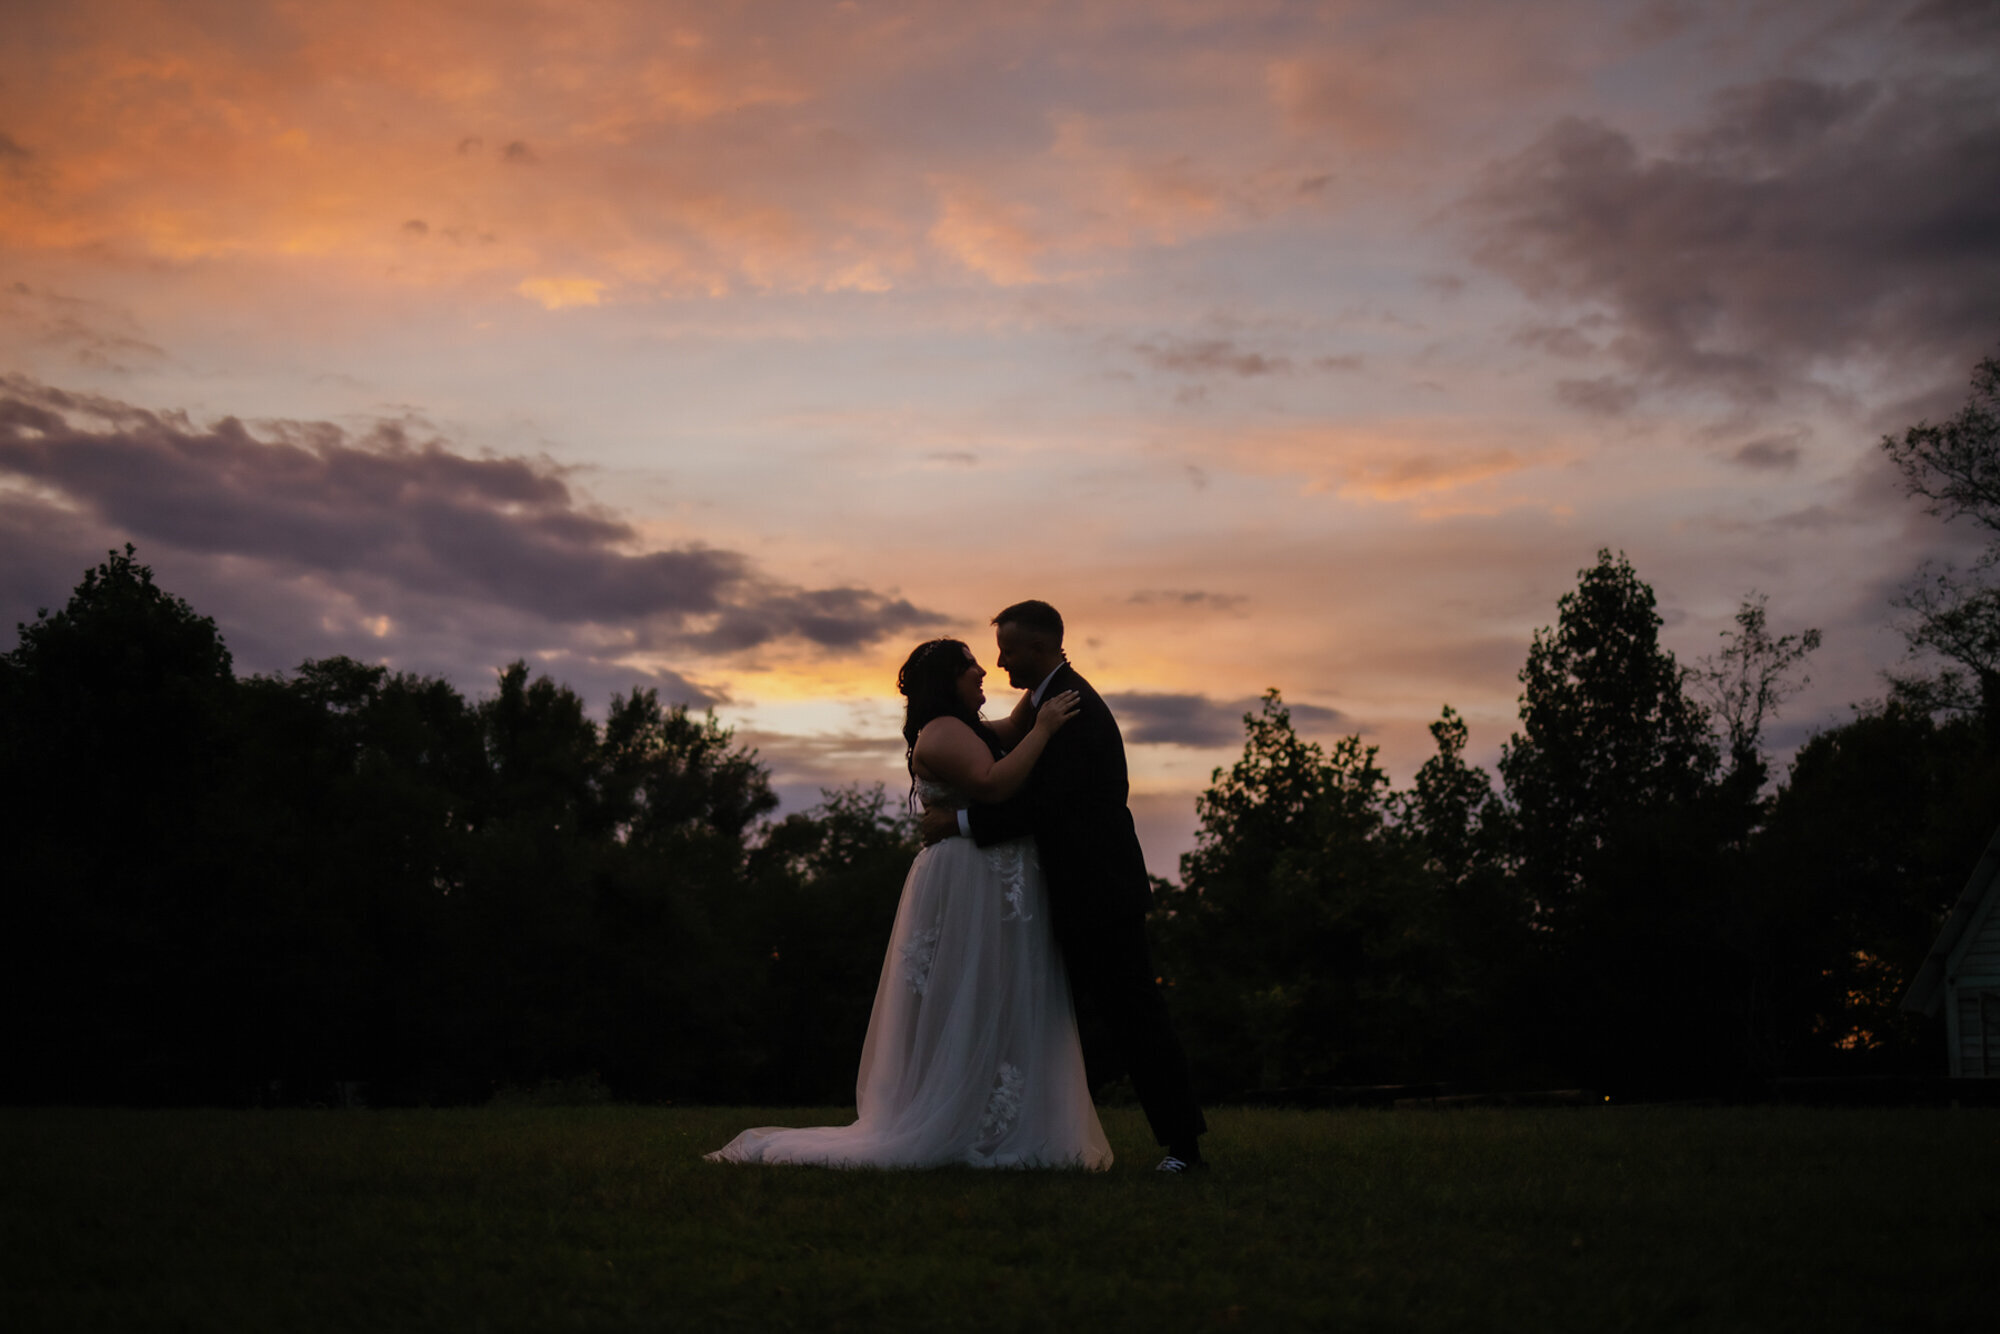 Gatlinburg elopement with bride adn groom embracing in a field after sunset with their silhouettes with the line of trees behind them